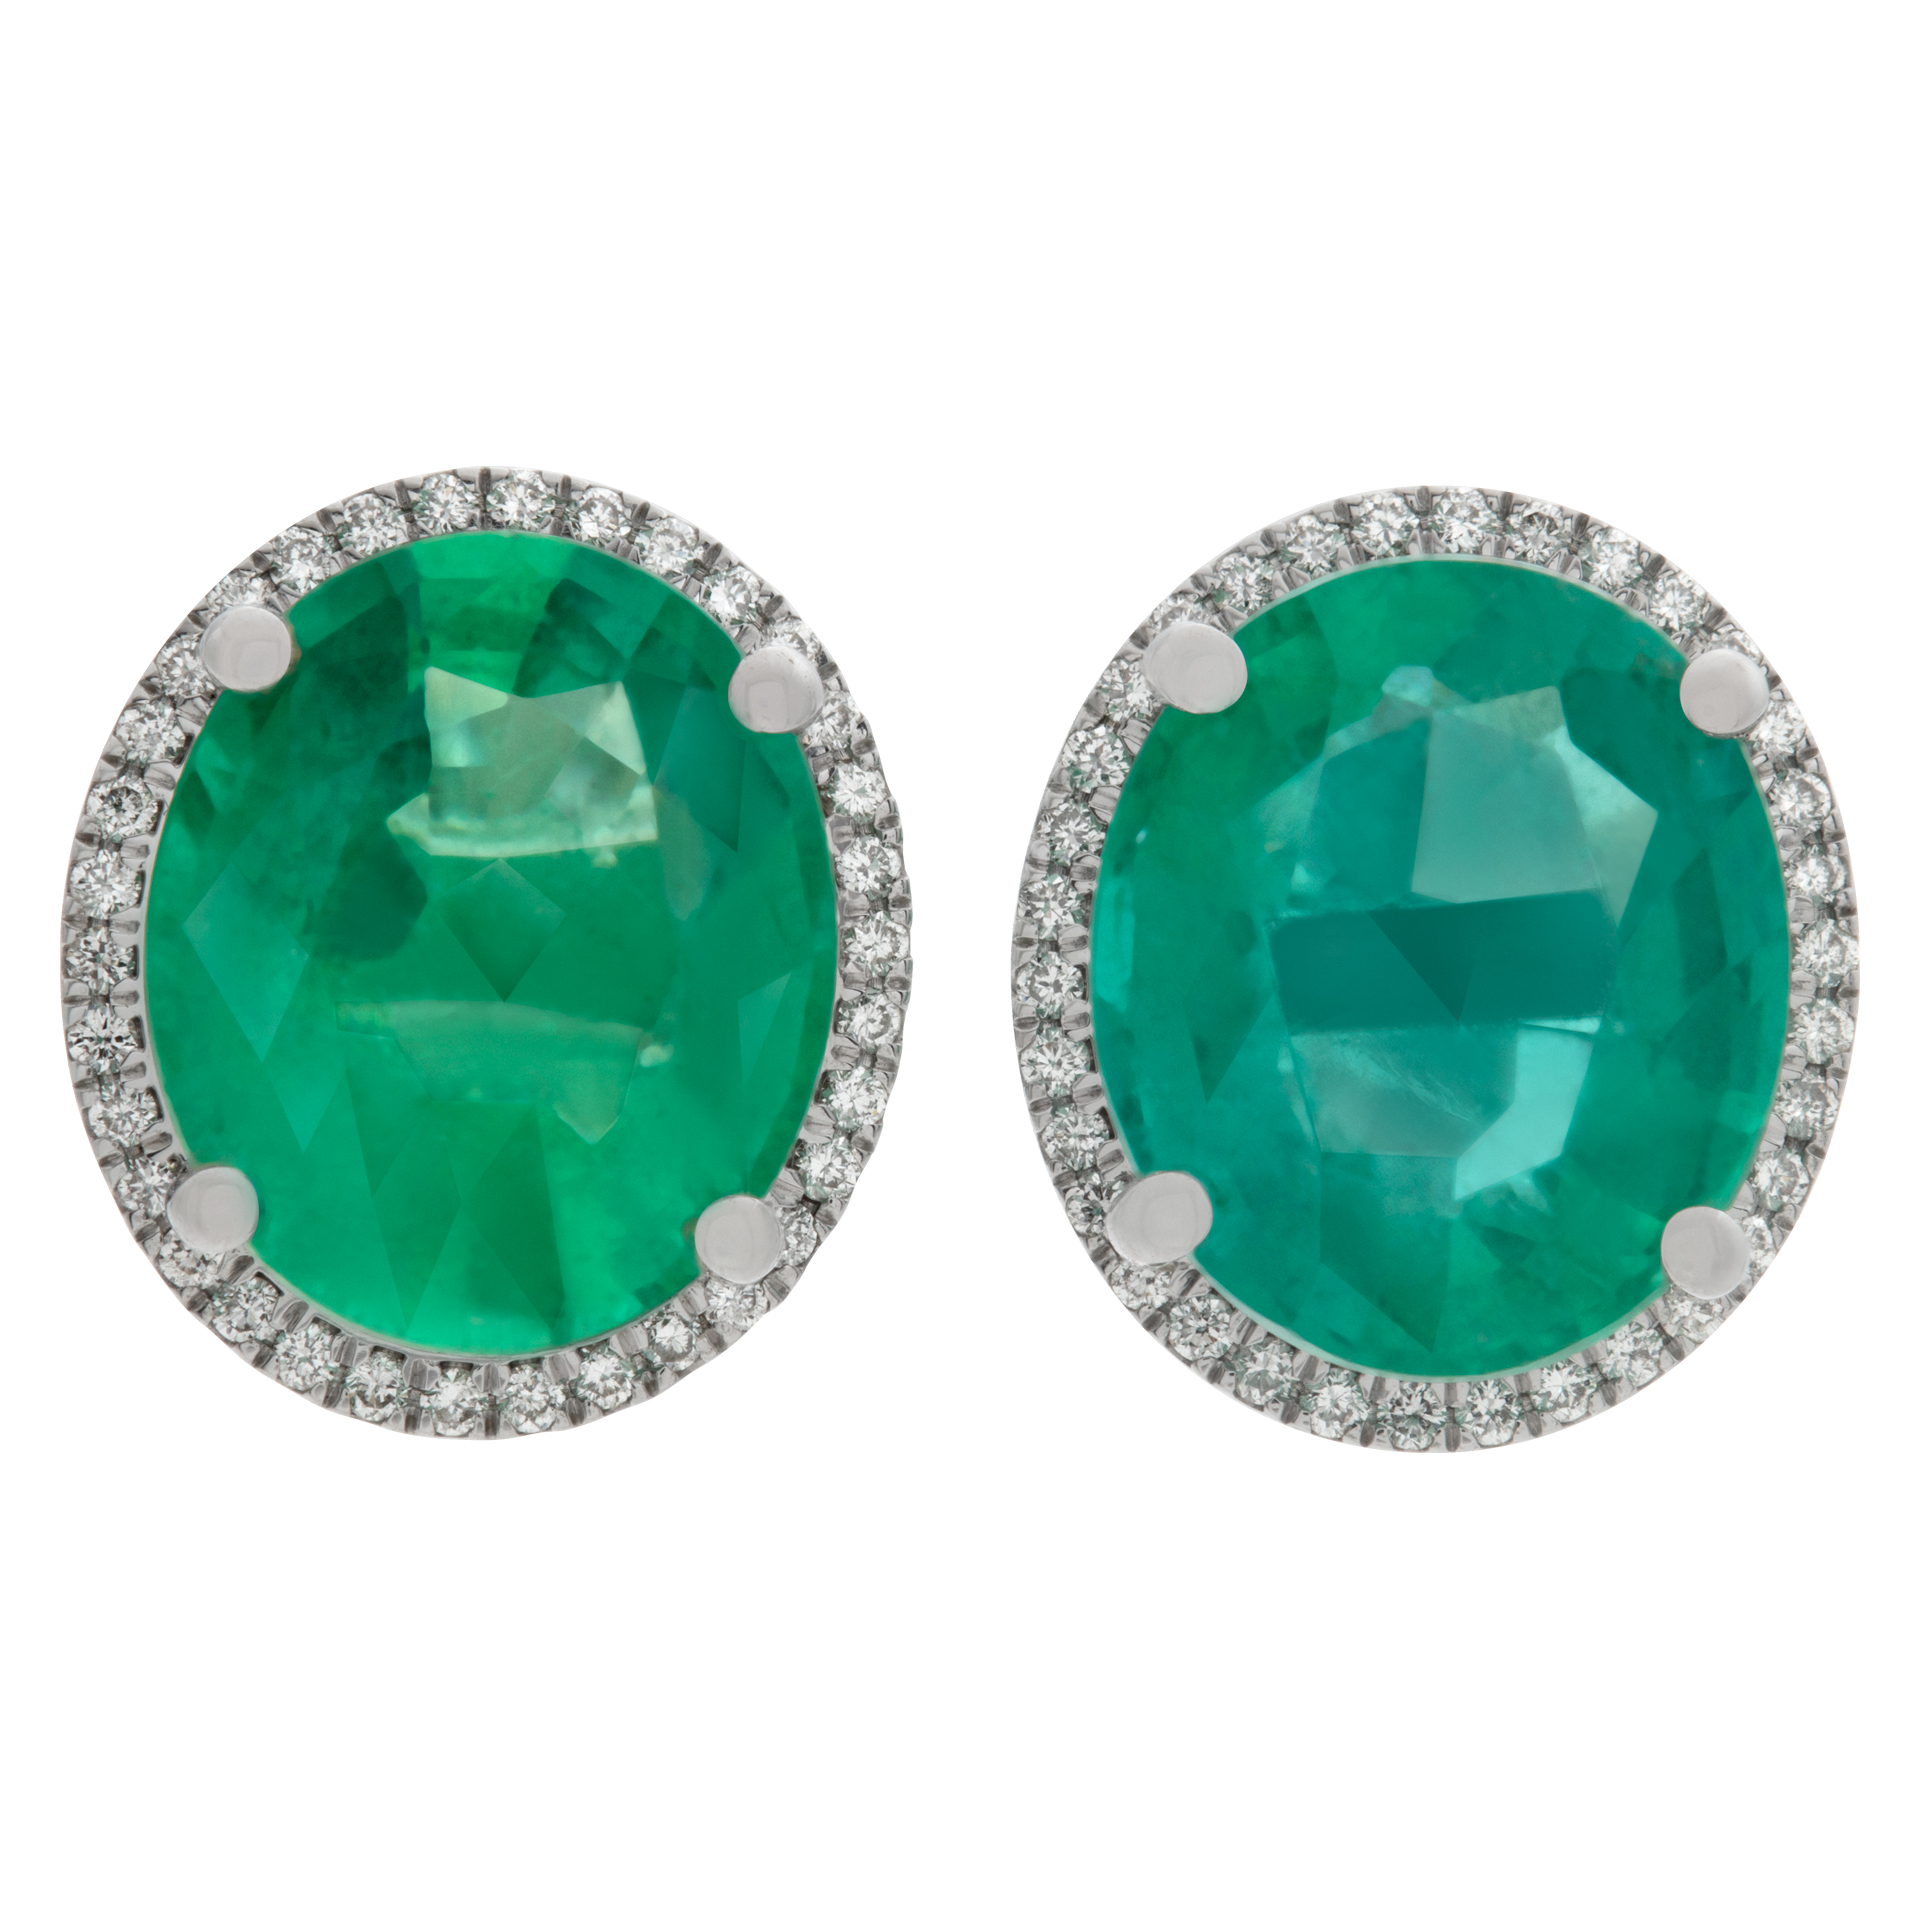 Diamond and emerald stud earrings in 18k white gold